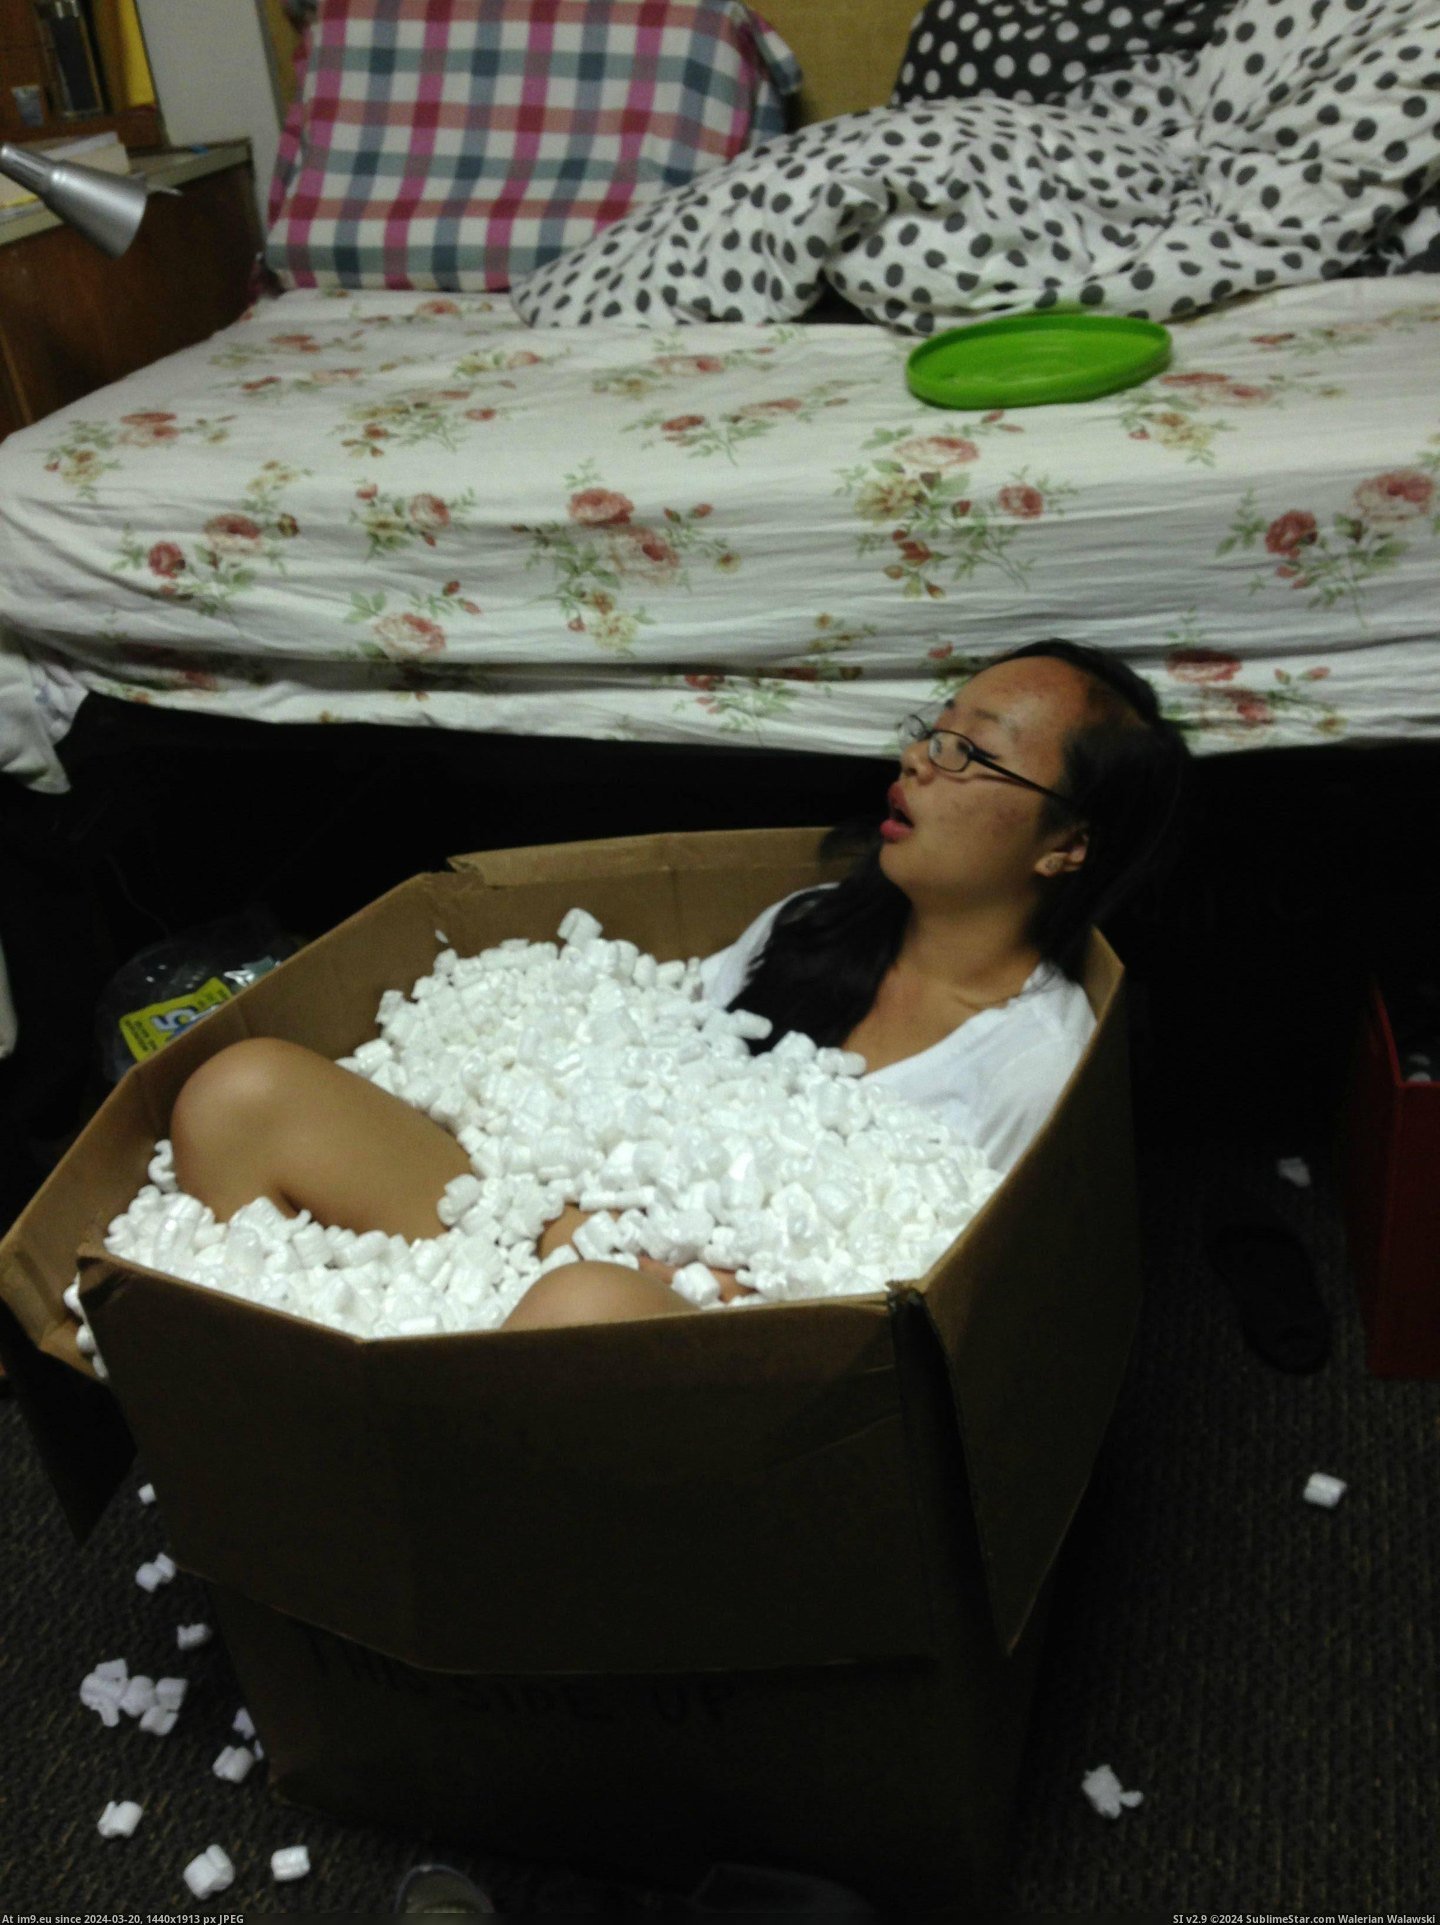 #Box #Find #Roommate #2am #Peanuts #Wake #Passed #Packing [Pics] I wake up at 2am to find my roommate passed out in a box of packing peanuts. Pic. (Bild von album My r/PICS favs))